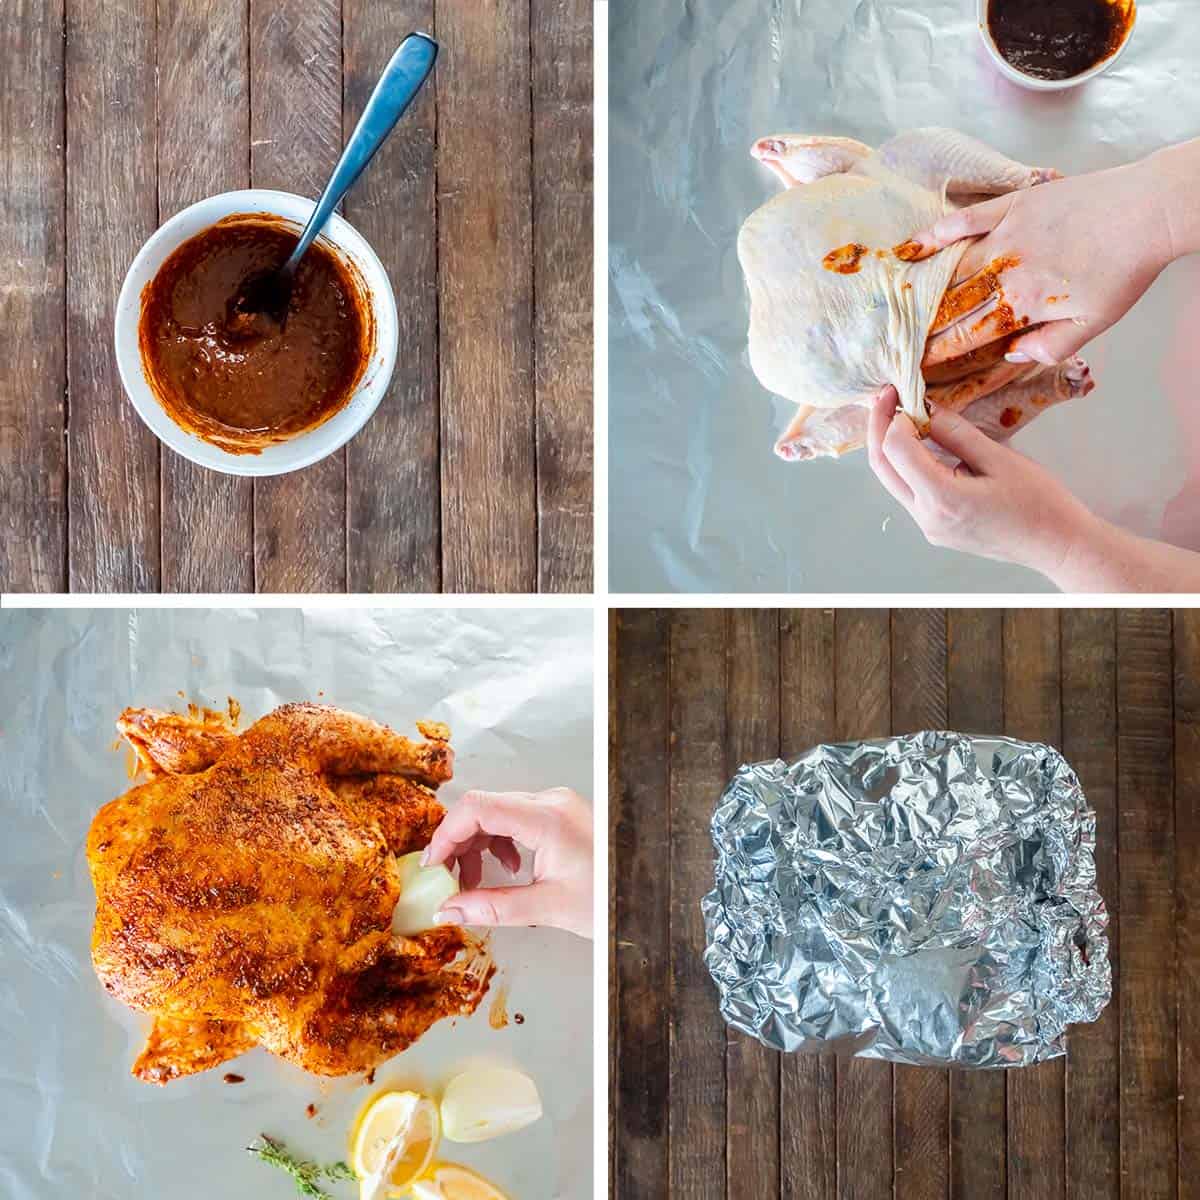 A butter and oil seasoning is rubbed on a whole chicken and the chicken wrapped in foil.